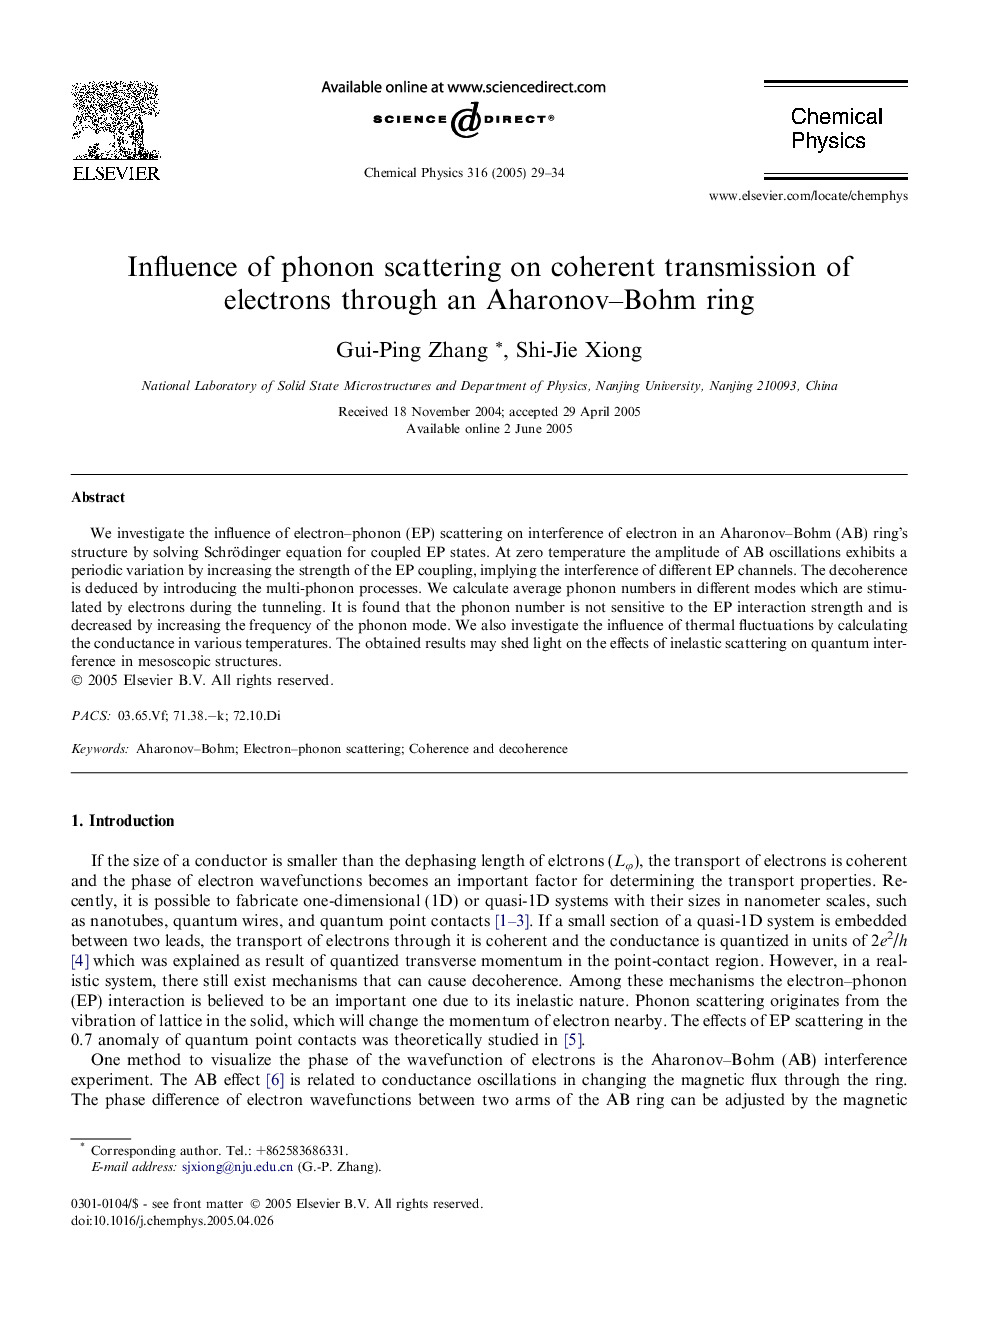 Influence of phonon scattering on coherent transmission of electrons through an Aharonov-Bohm ring